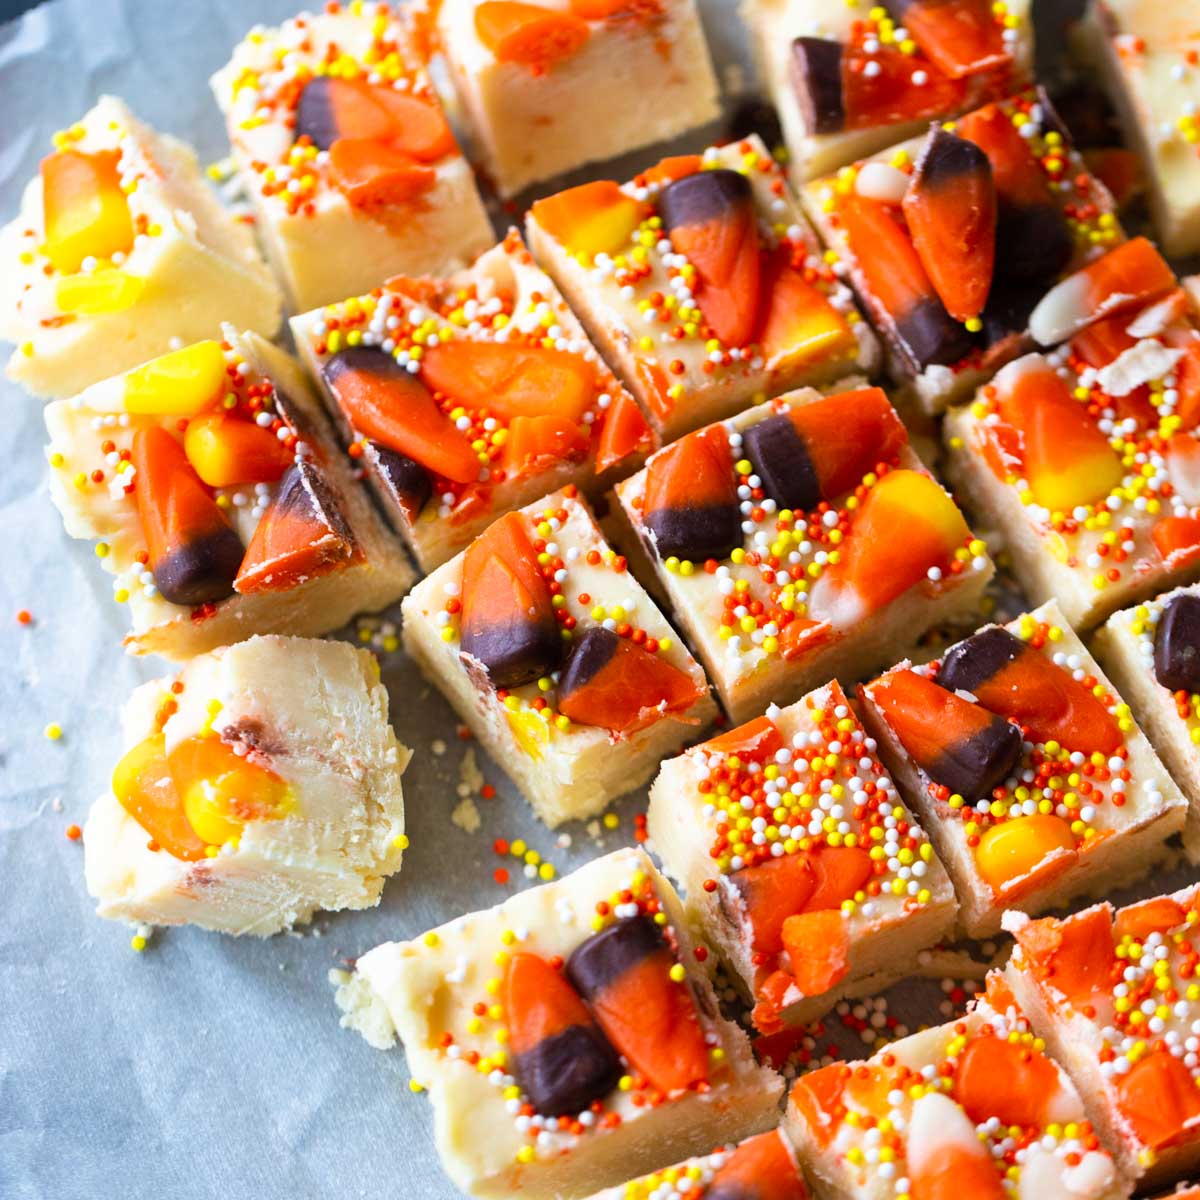 Candy Corn fudge is cut into squares on parchment paper. Orange, black, and yellow candies and sprinkles are pressed into the white fudge.